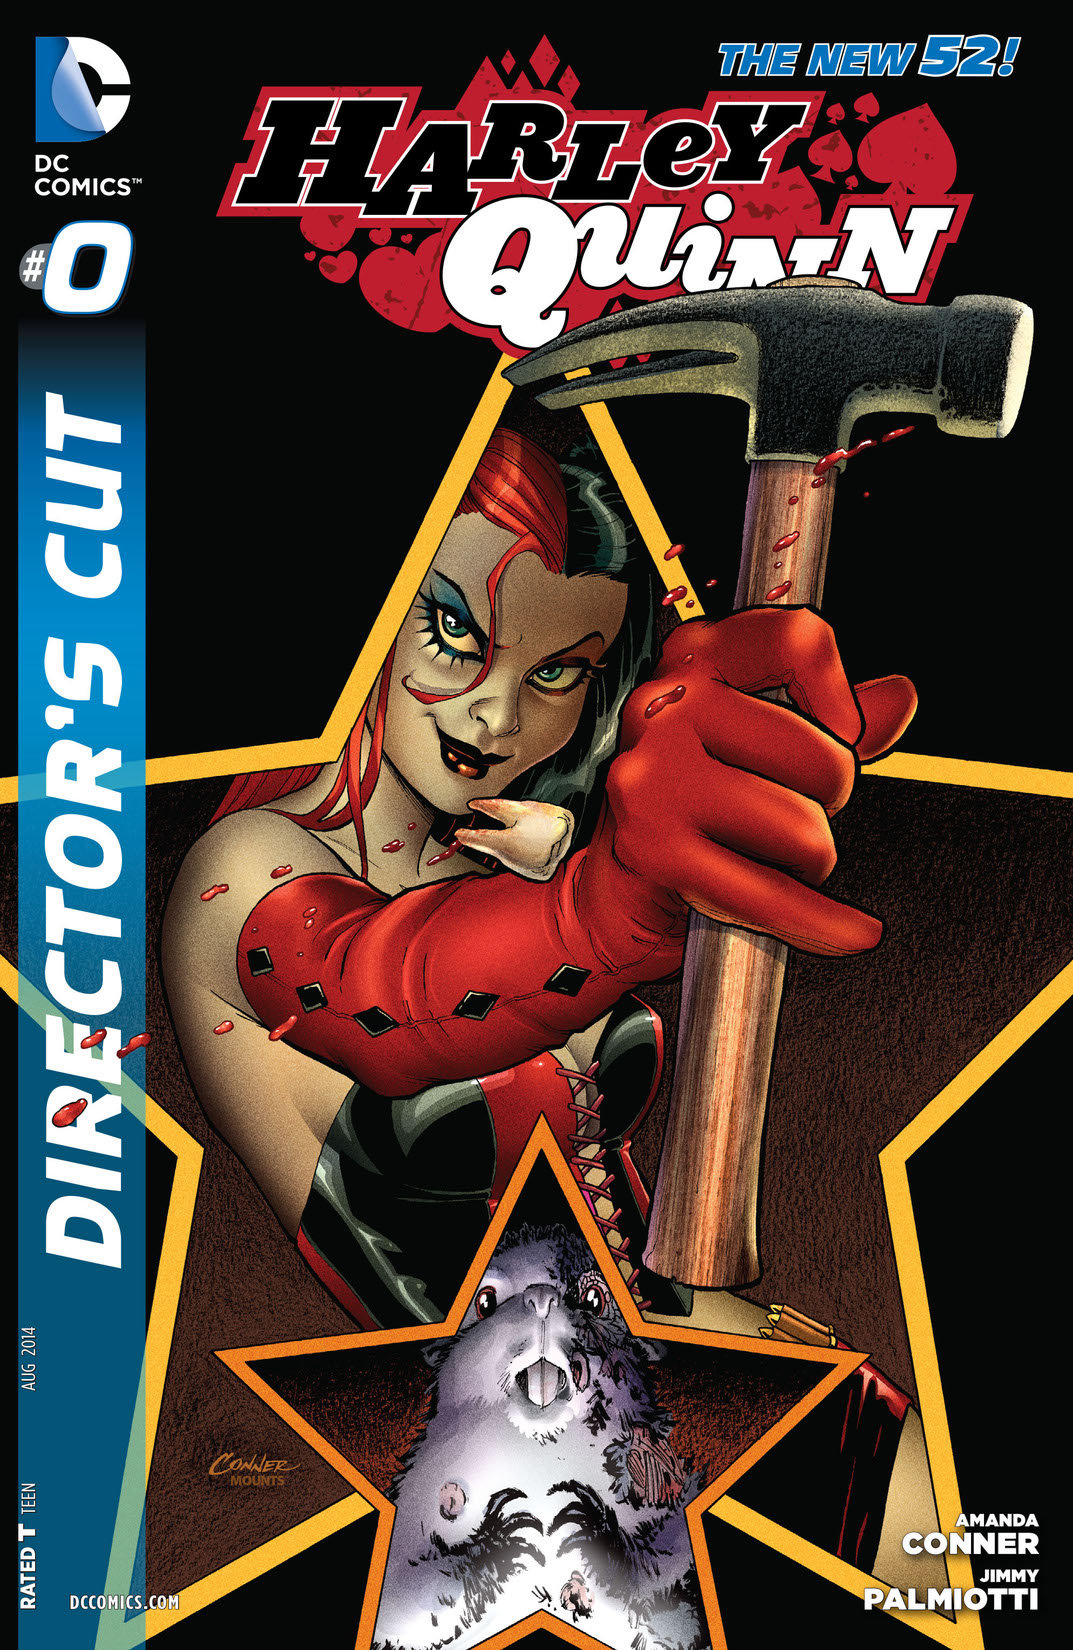 Harley Quinn Director's Cut (2014-) #0 preview images